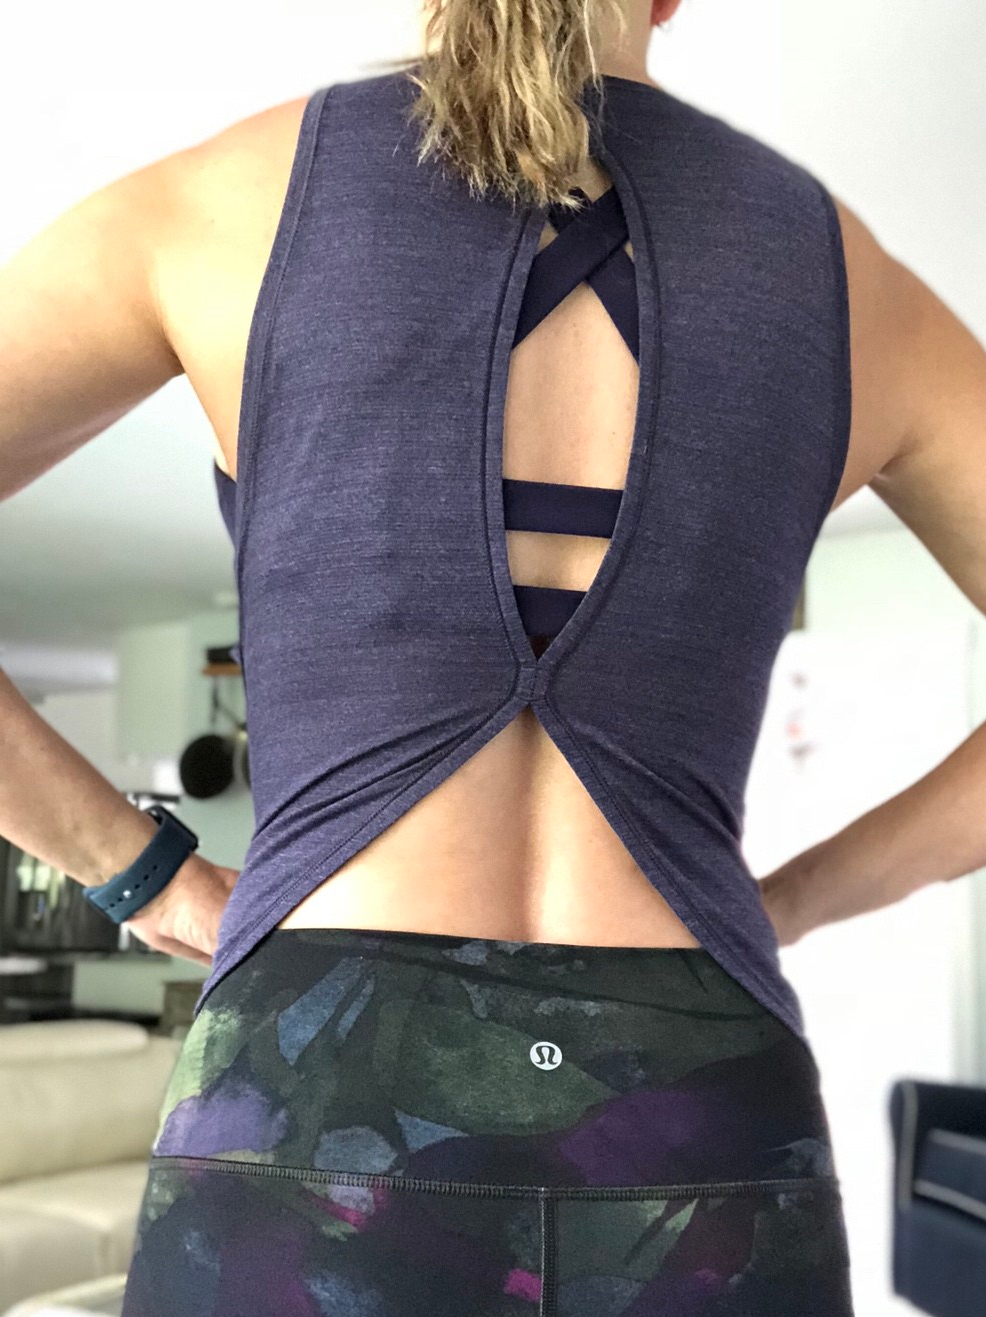 Lululemon Made Me Feel Fat – And Then They Changed My Mind – Geek